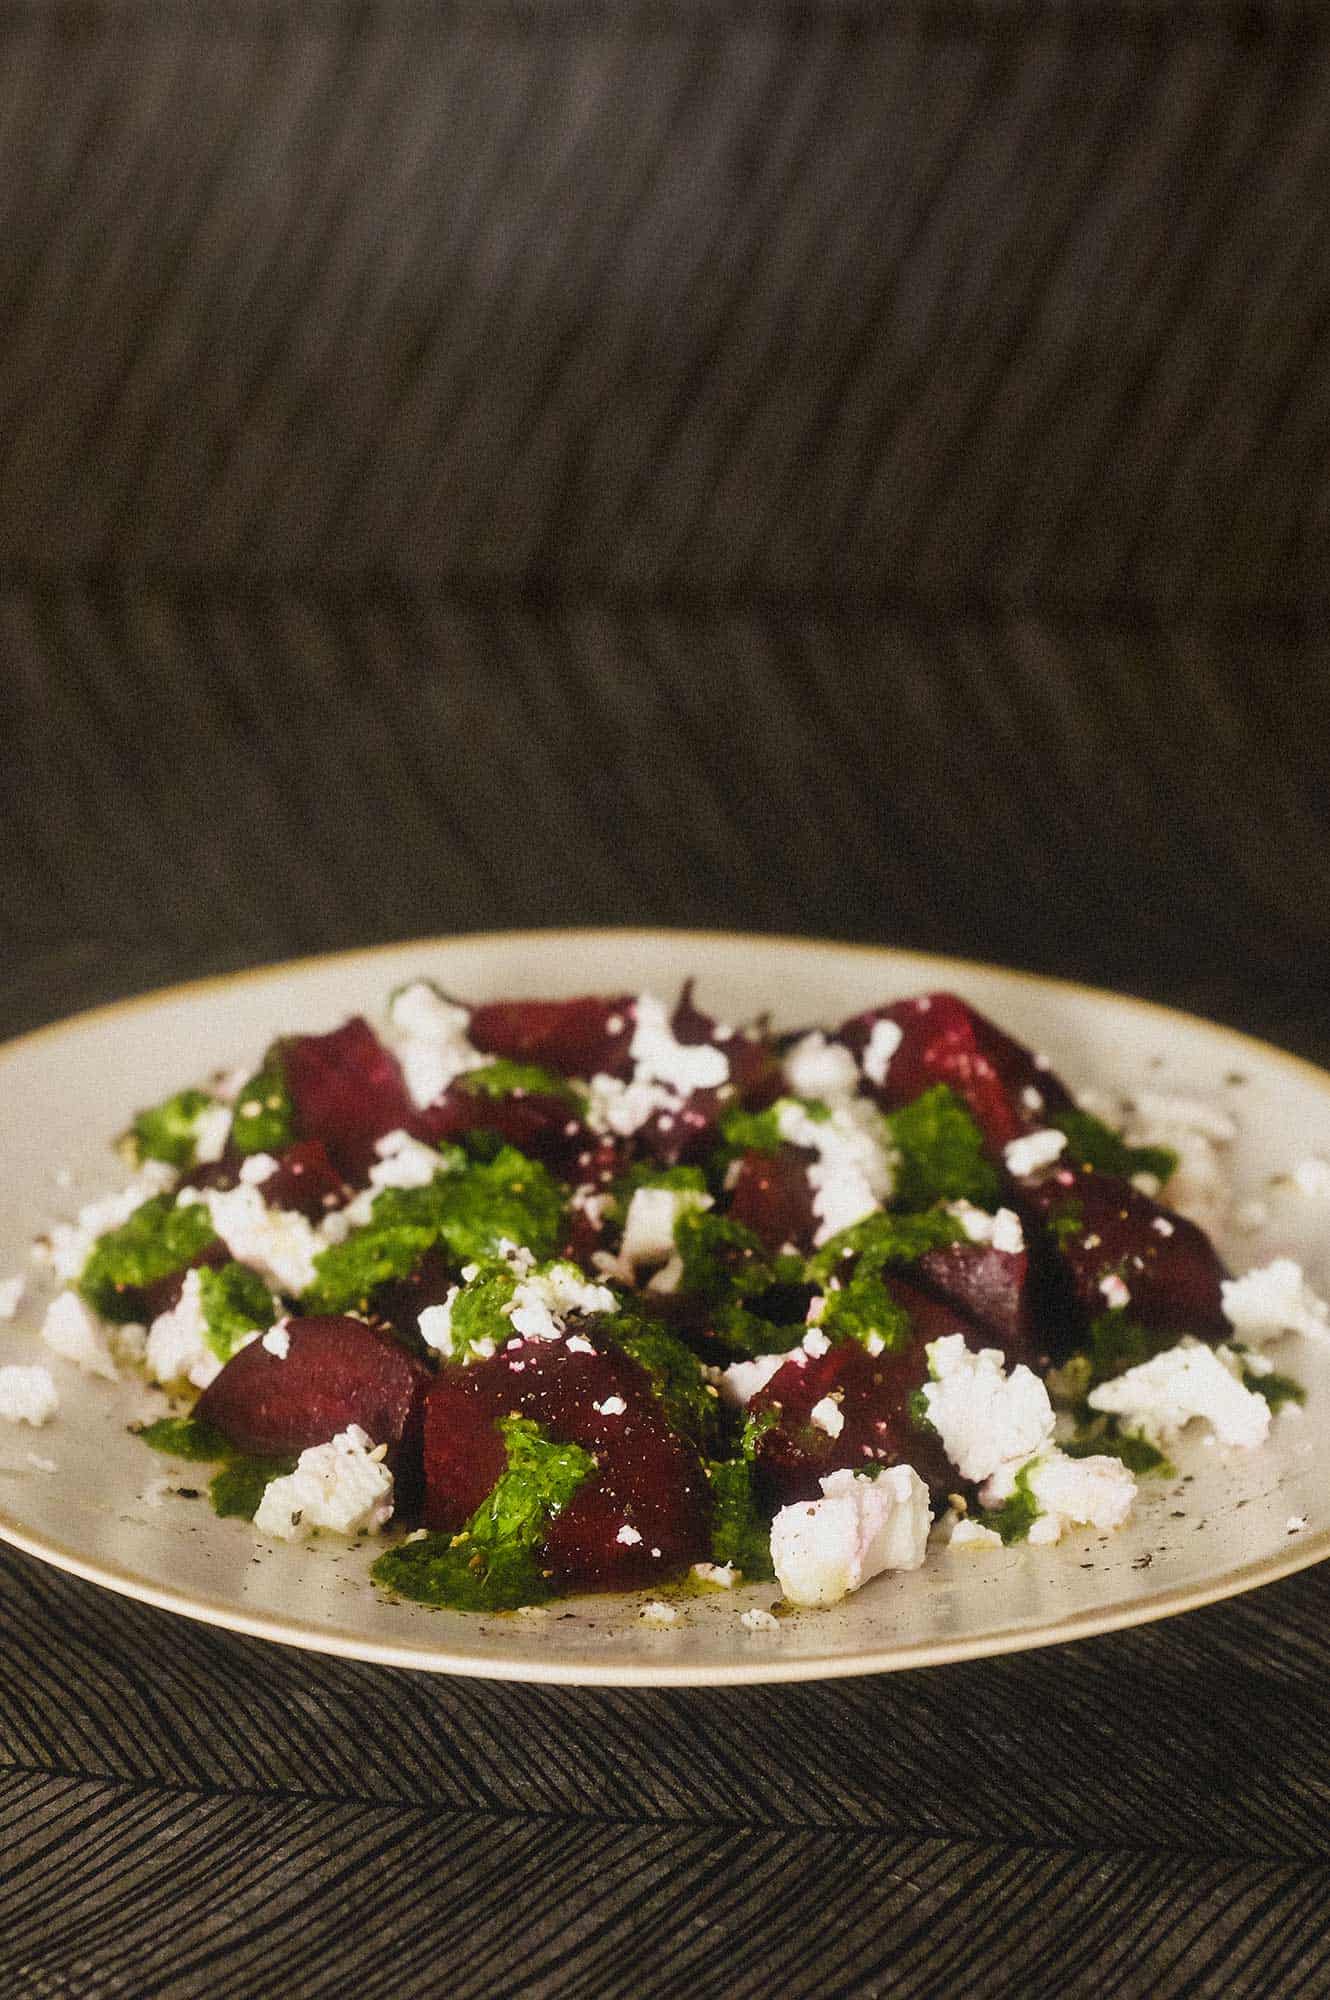 Roasted beetroot with herb dressing and feta cheese